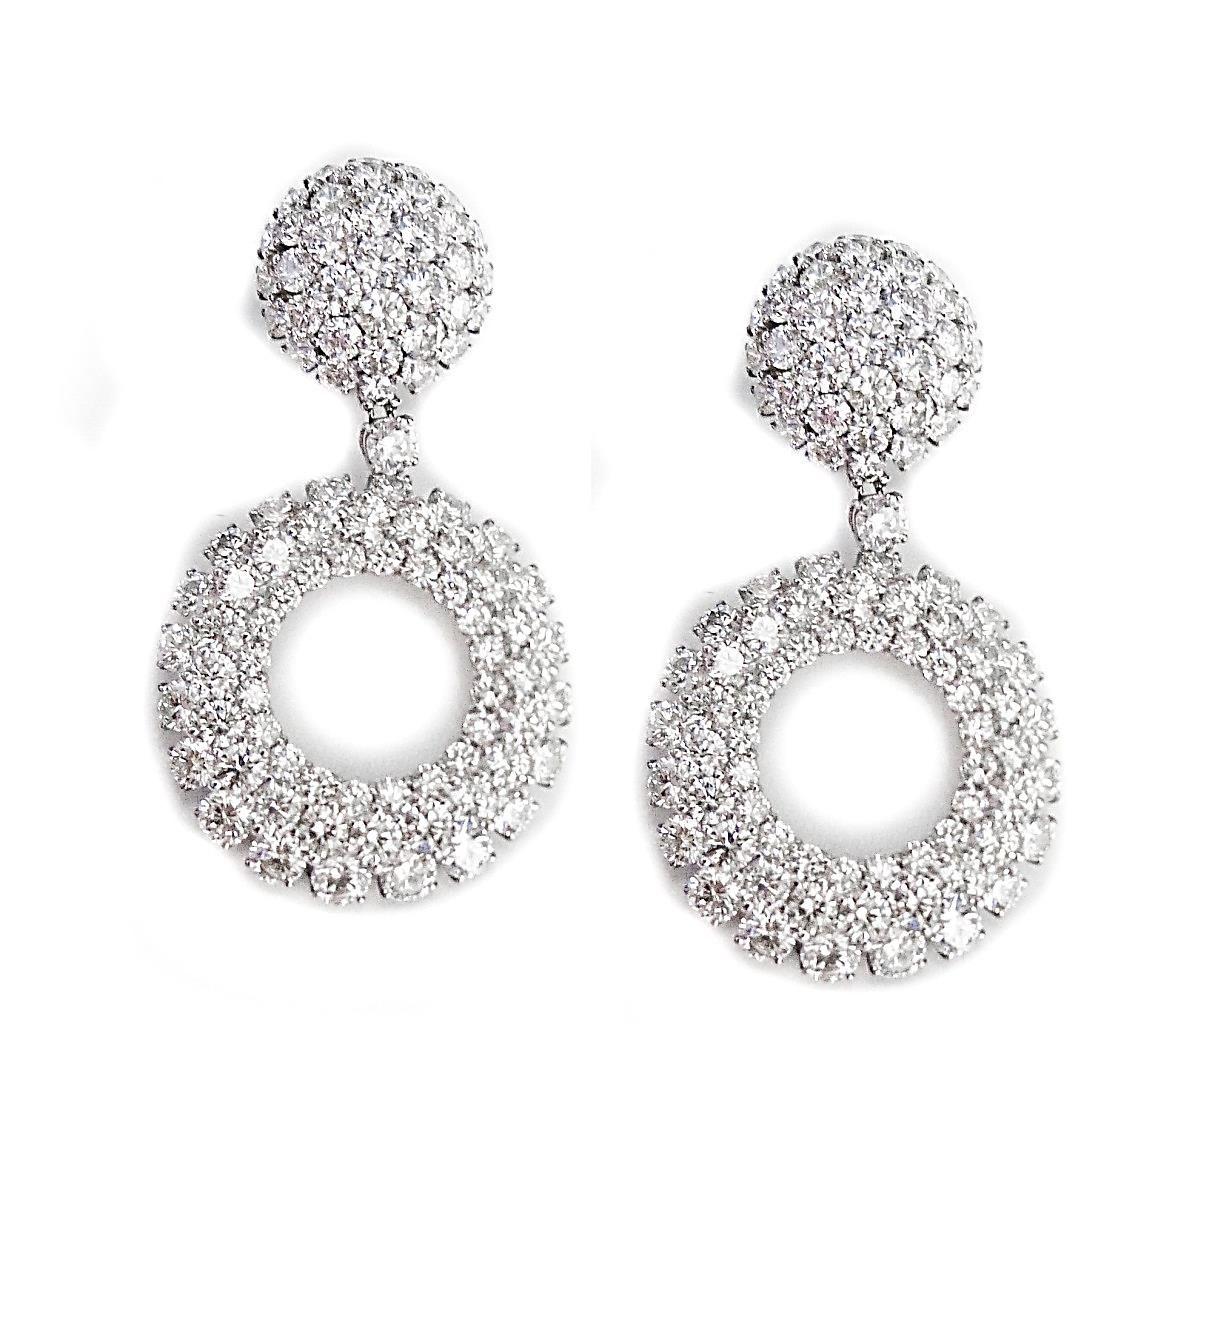 Women's Circle Pave Fashion Diamond Earrings with Brilliant Cut Diamonds in White Gold For Sale